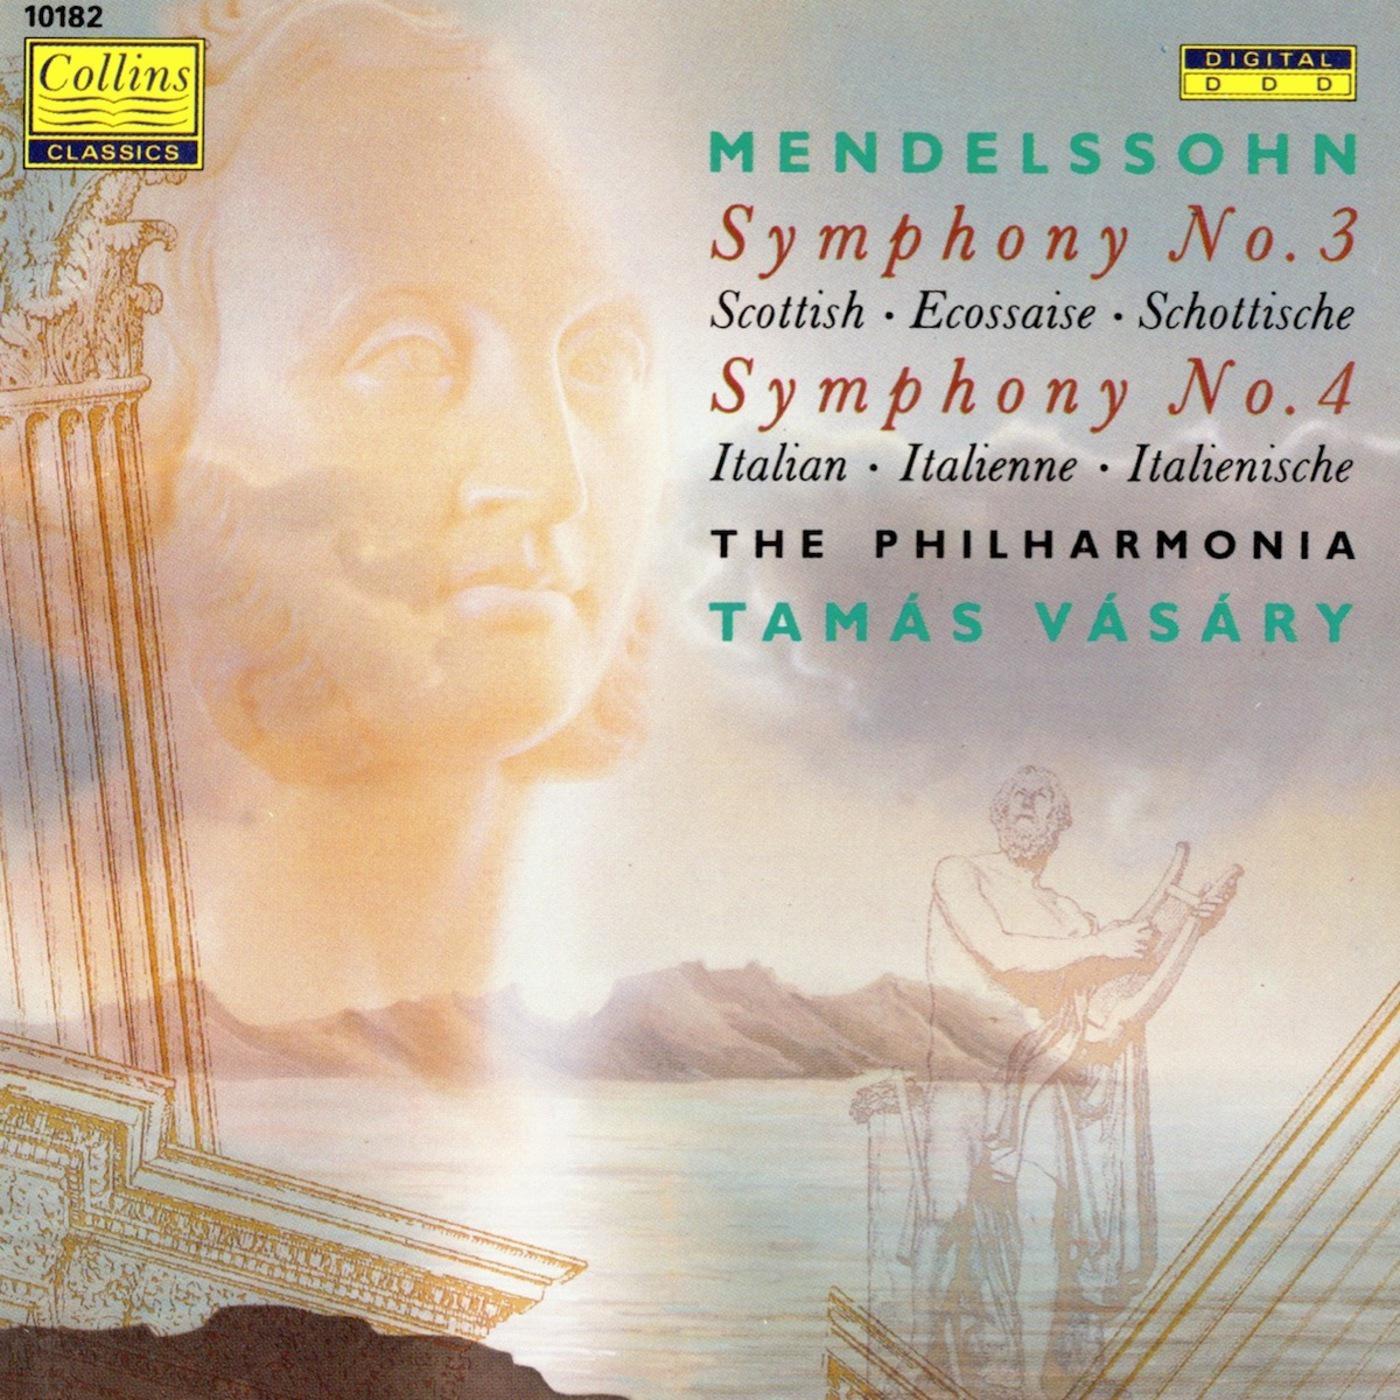 Symphony No. 3 in A Minor, Op. 56, MWV N 18 "Scottish": II. Vivace non troppo